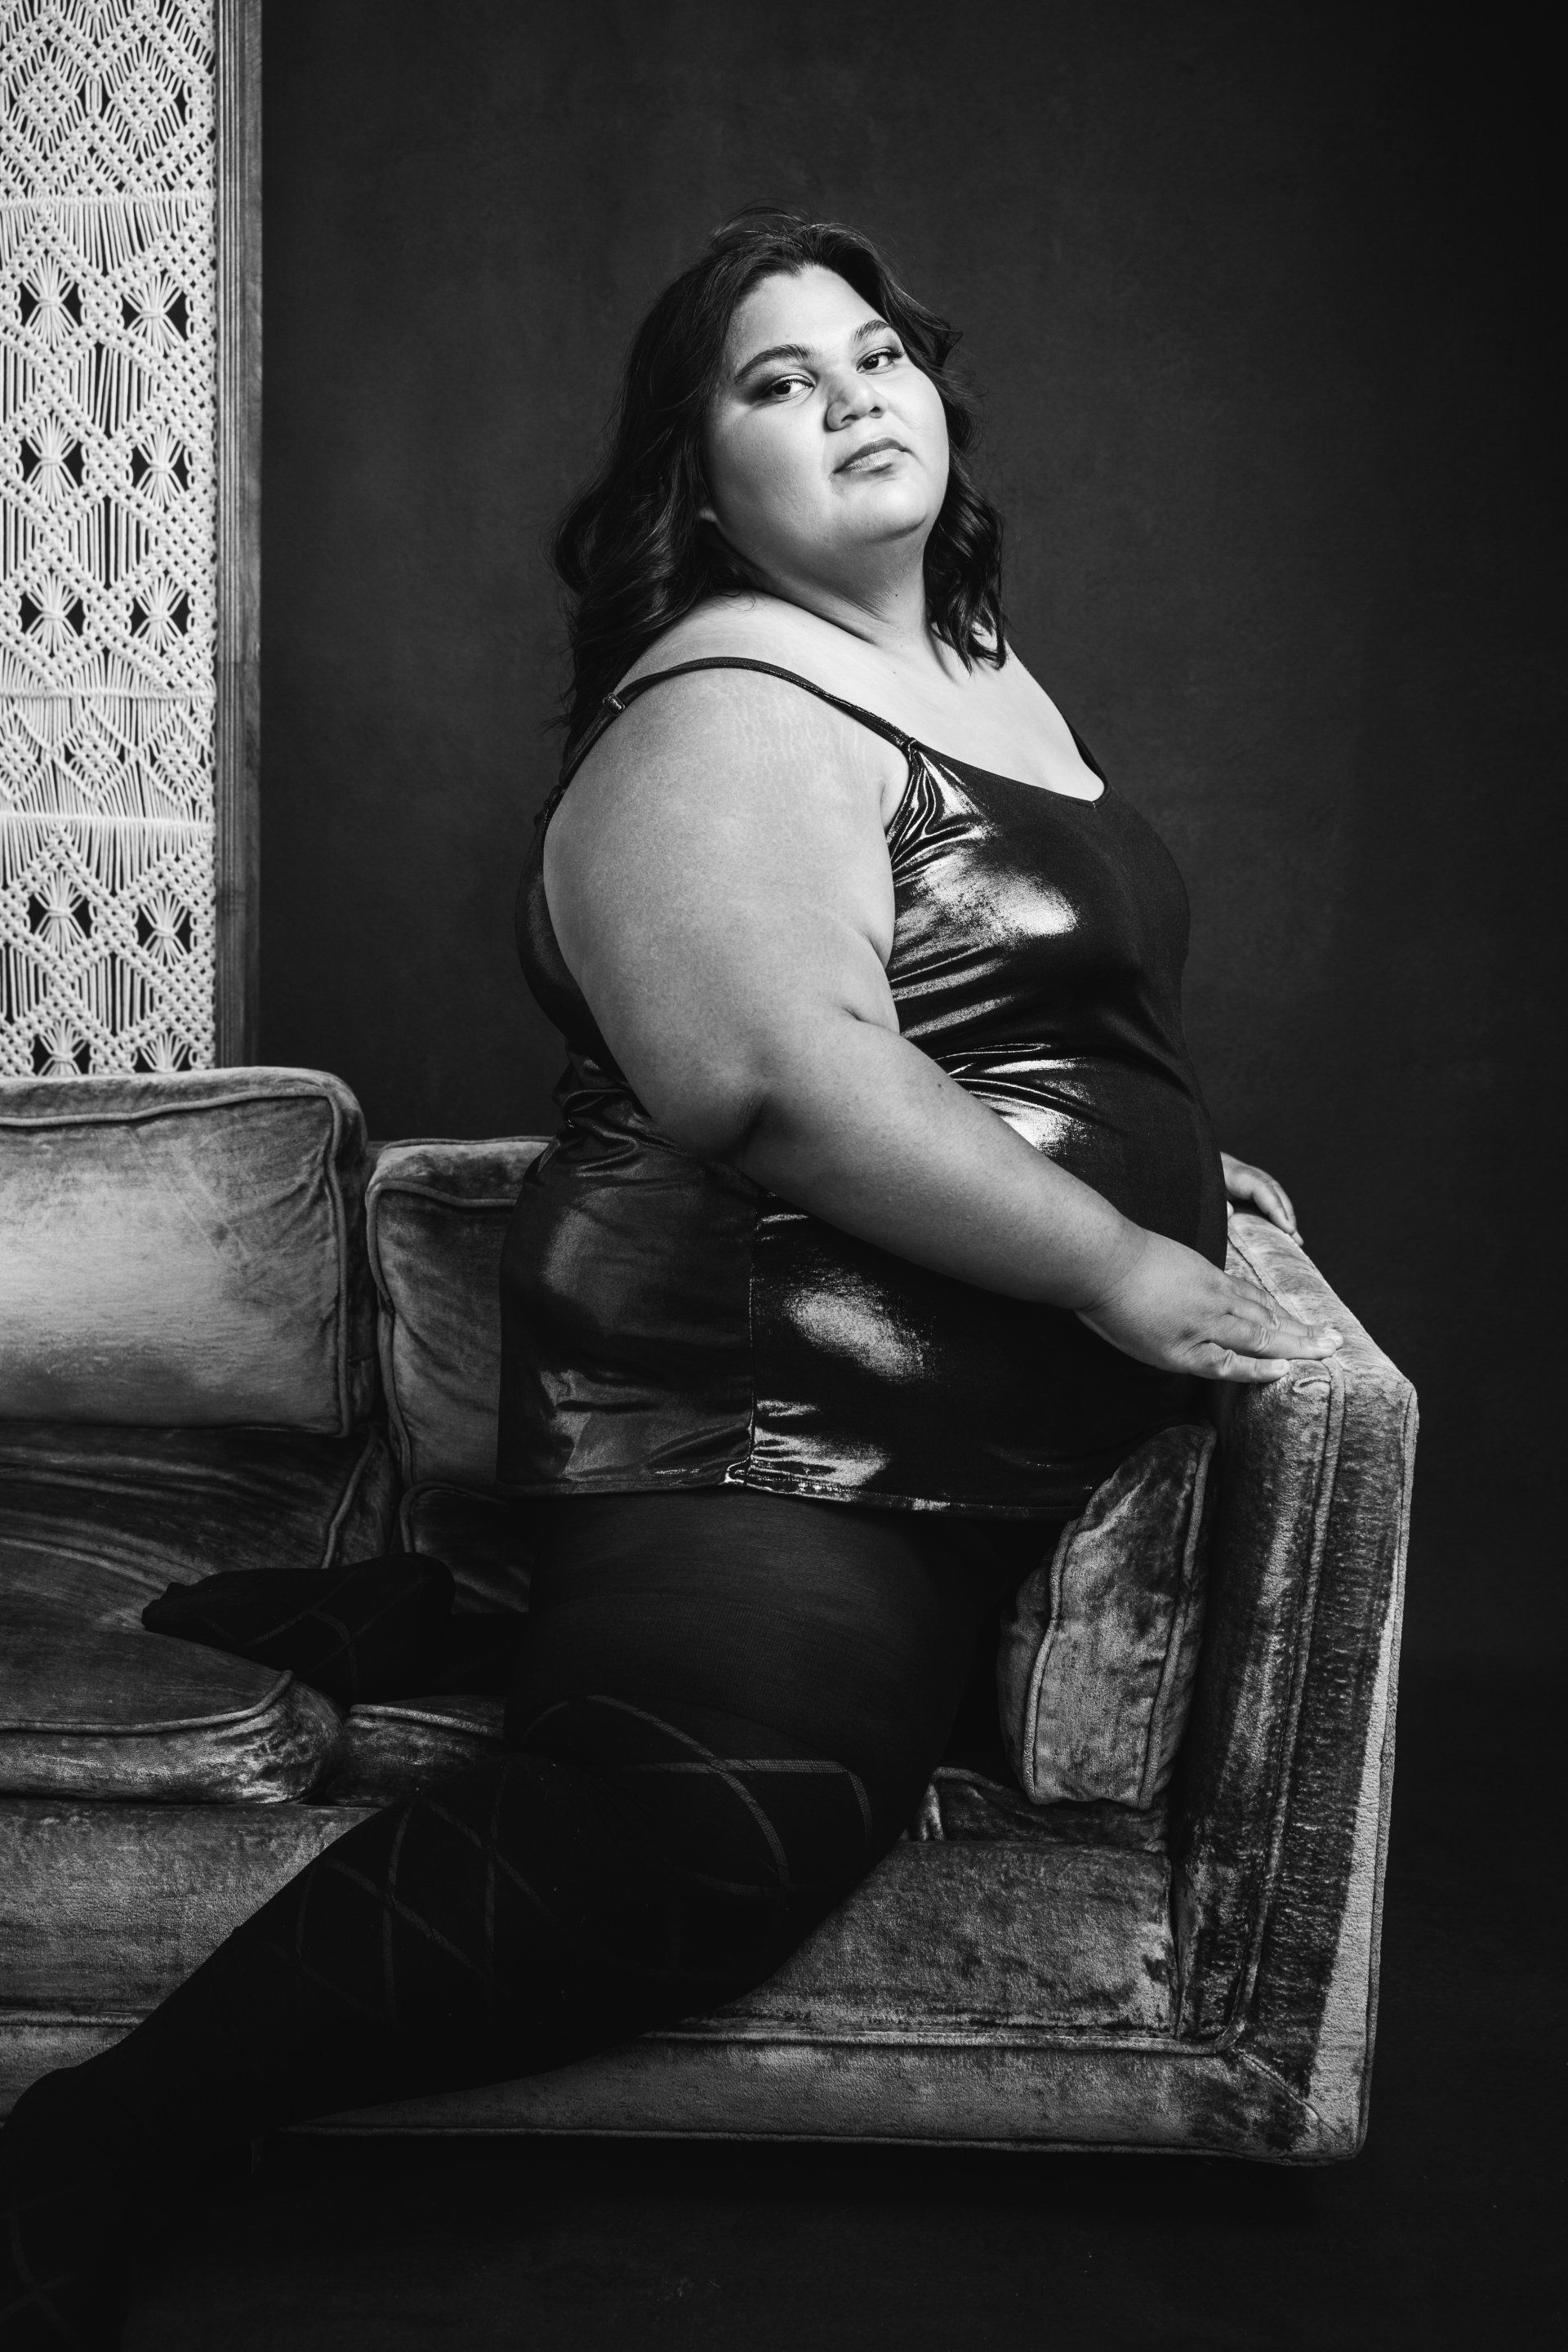 A woman posing on a couch in front of a wall.